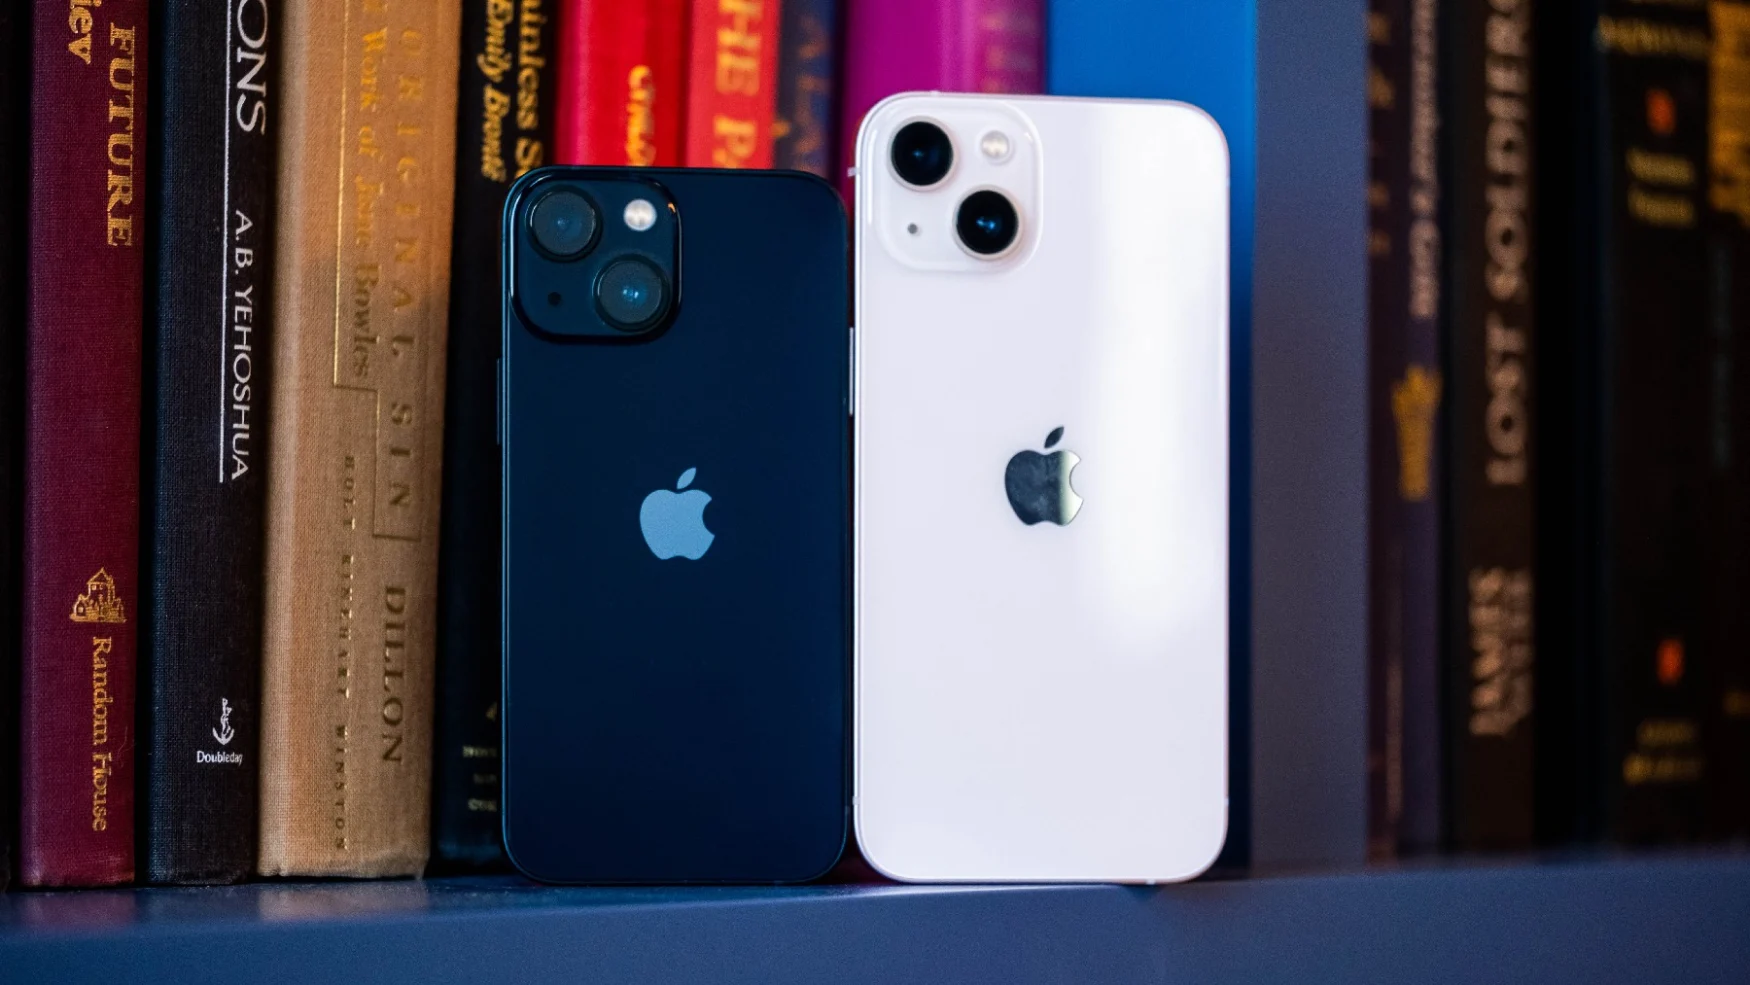 A black iPhone 13 mini and pink iPhone 13 standing in front of some books on a shelf, with their rears facing the camera.